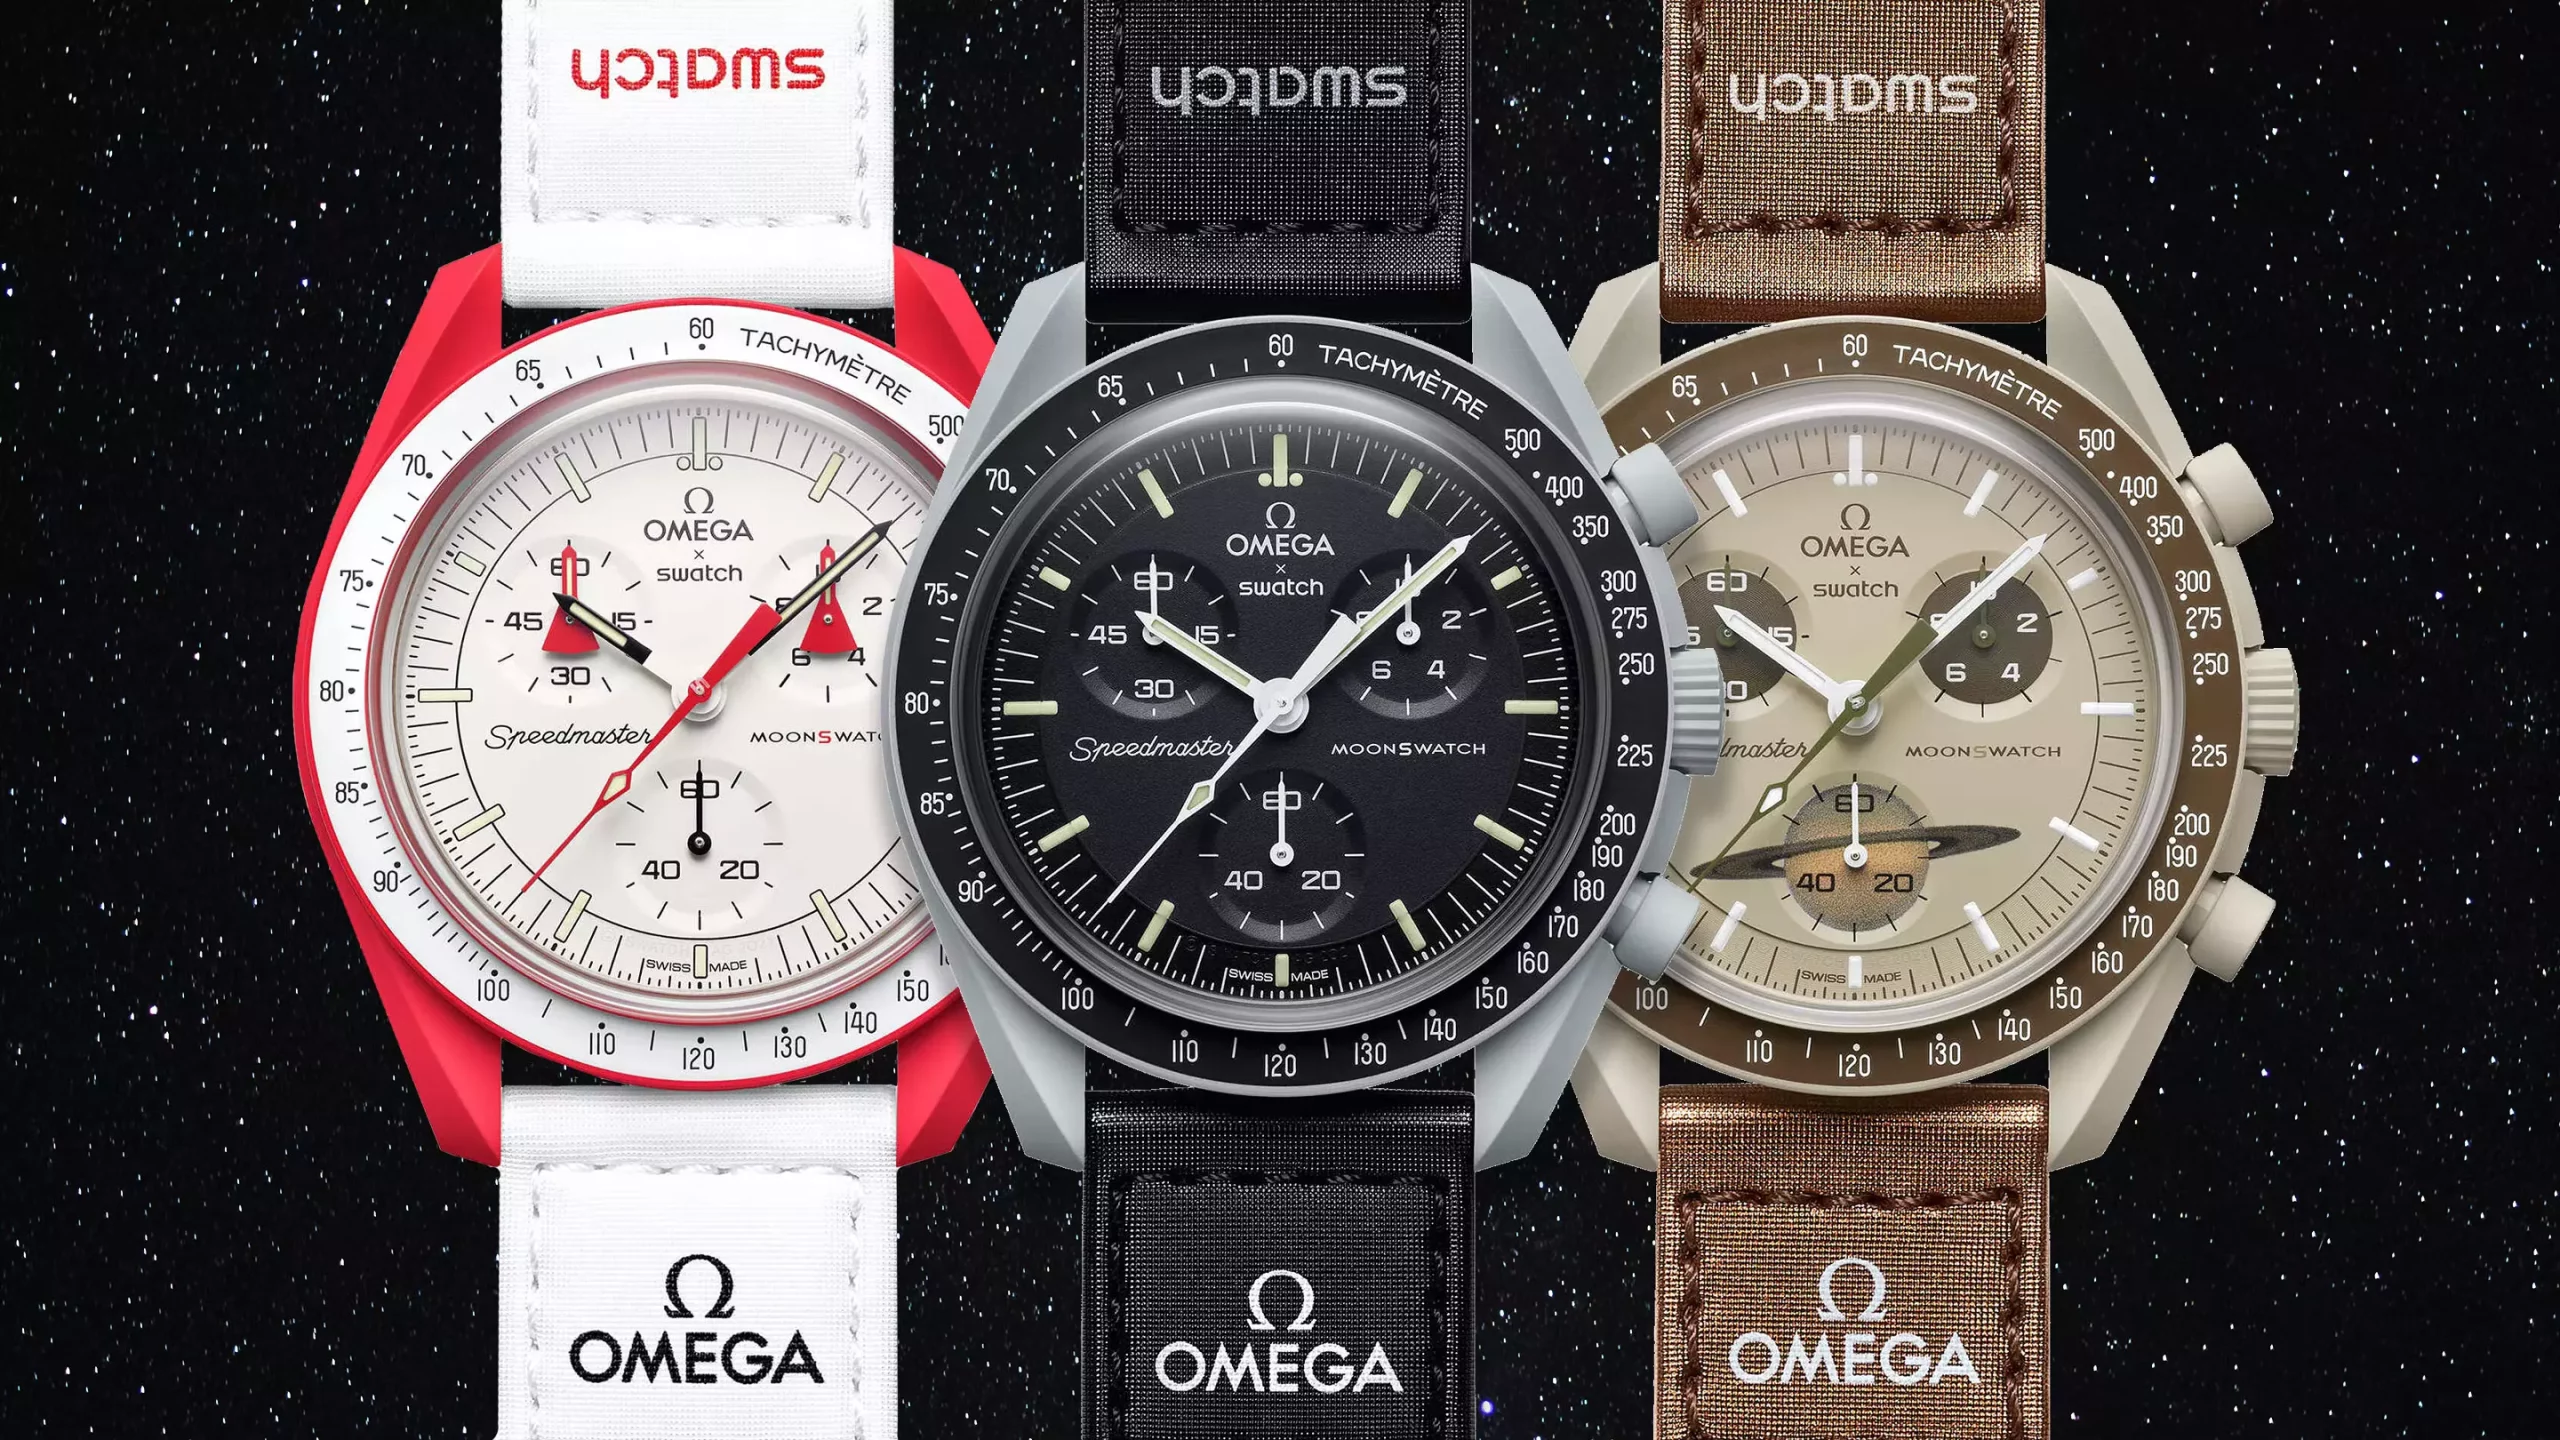 Introducing The Omega x Swatch MoonSwatch Collection